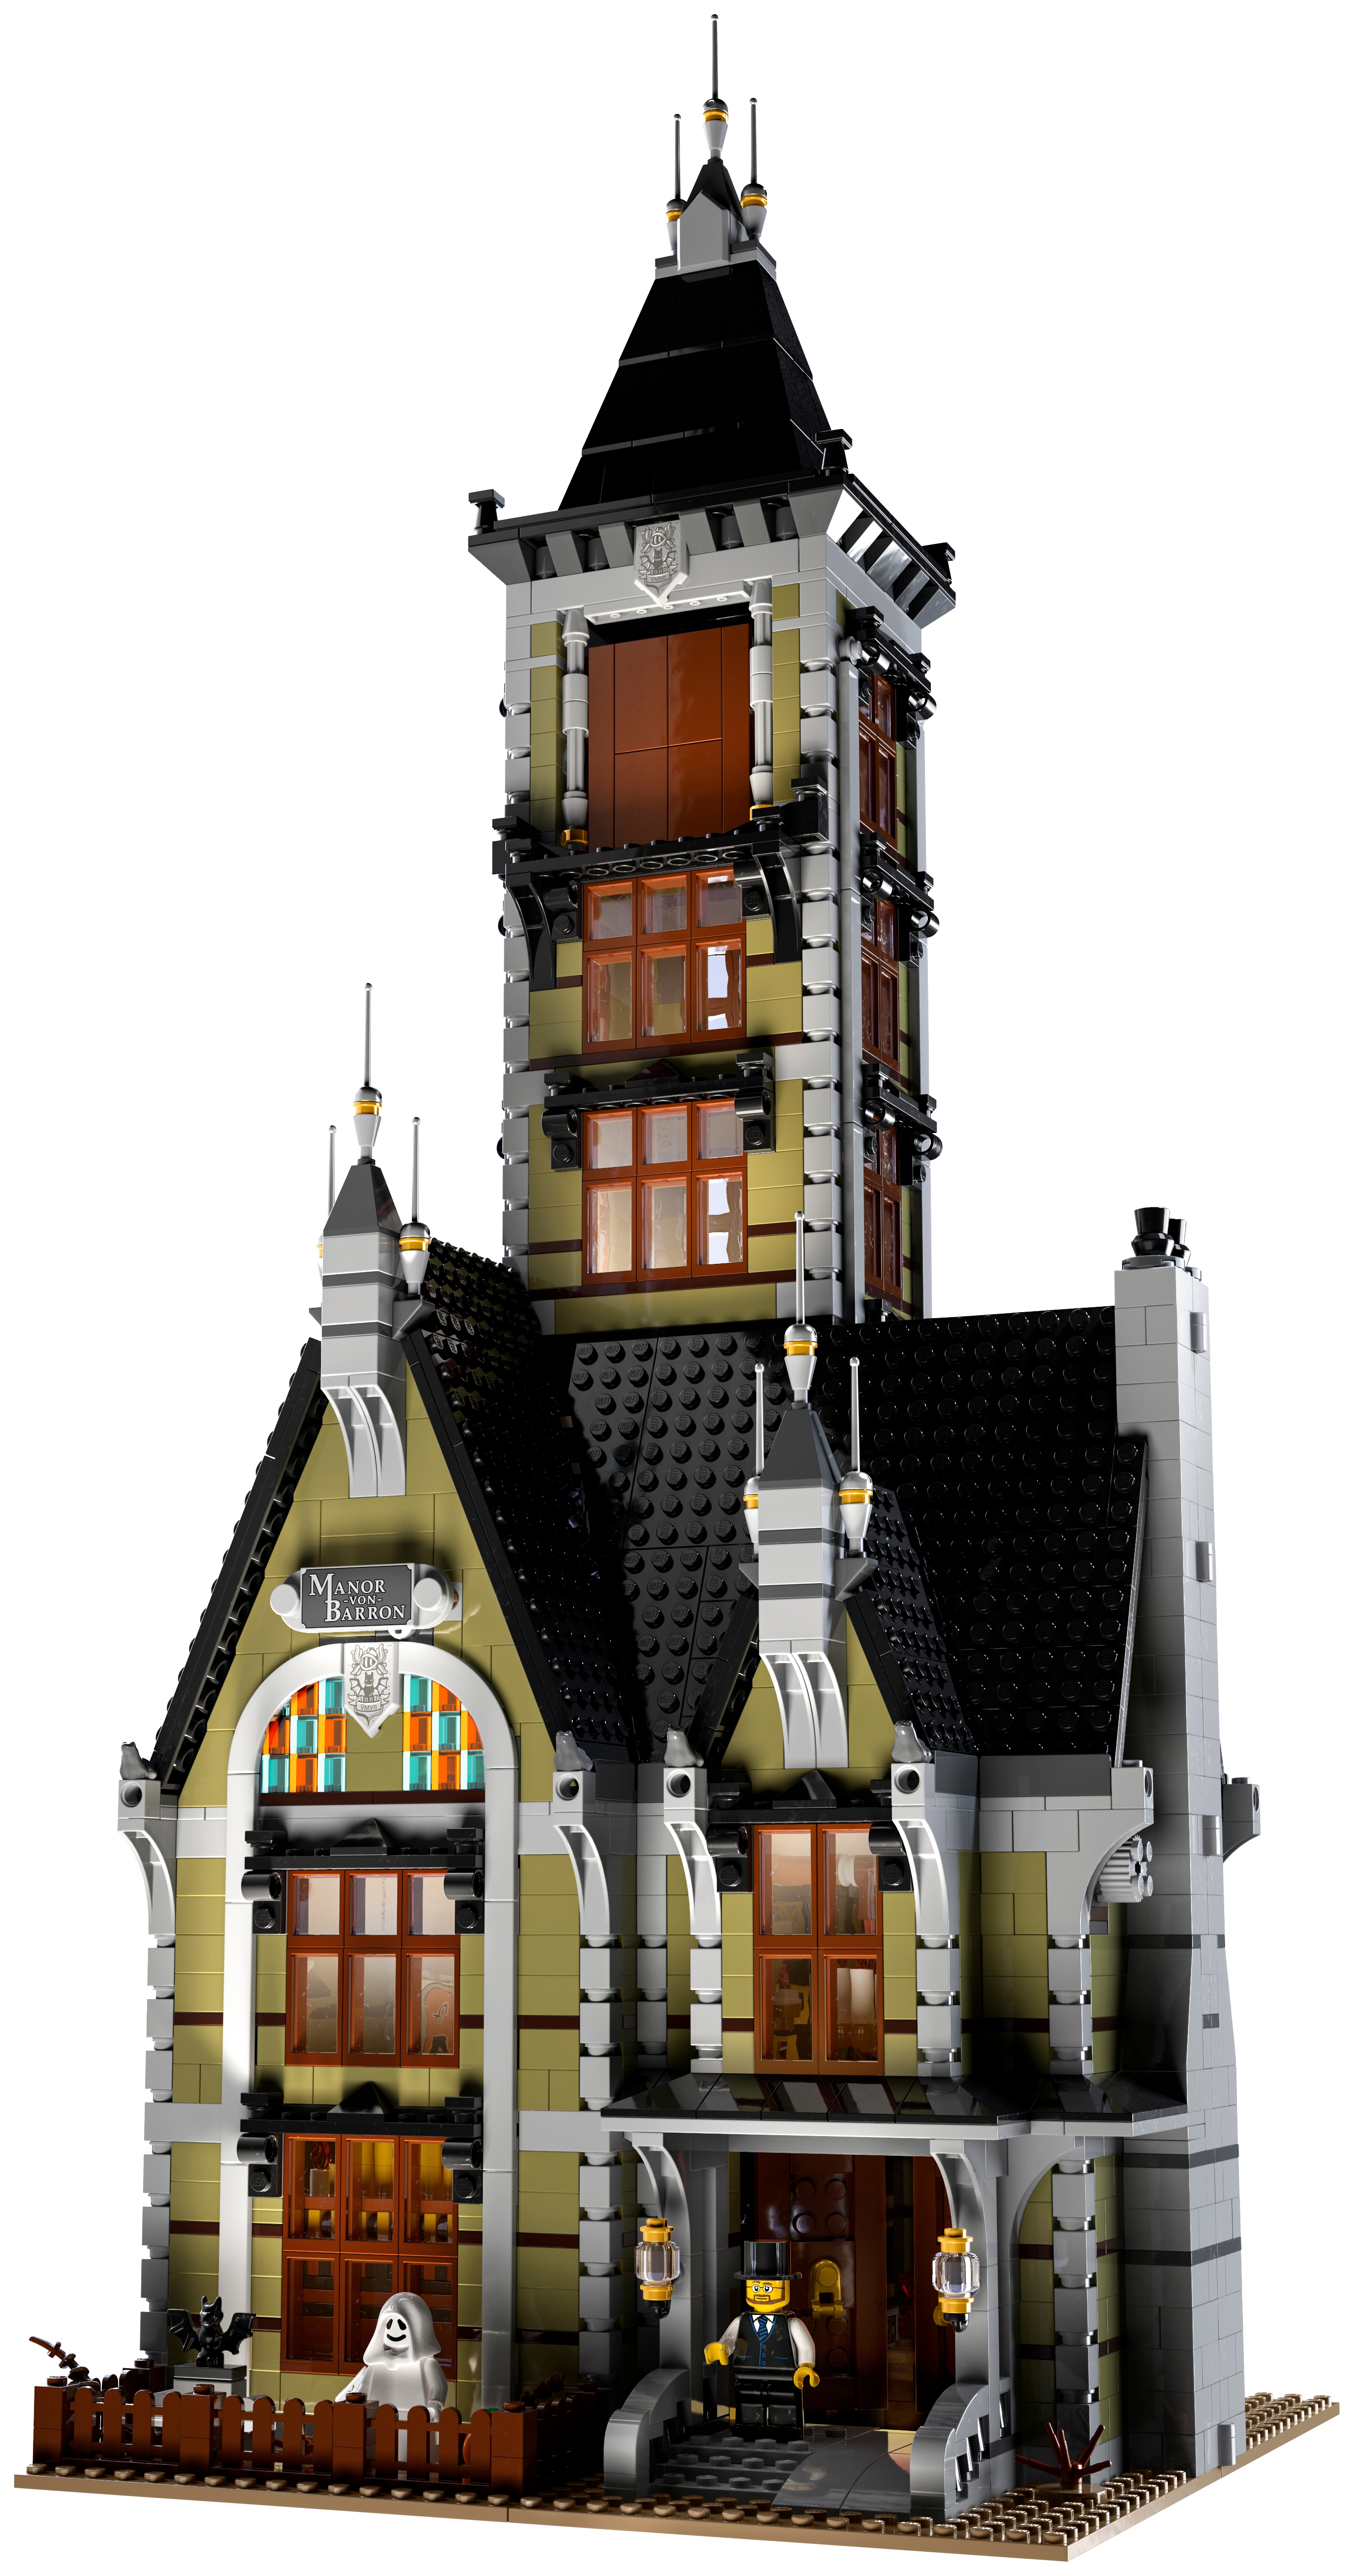 Haunted House 10273 | Expert | online at the Official LEGO® Shop